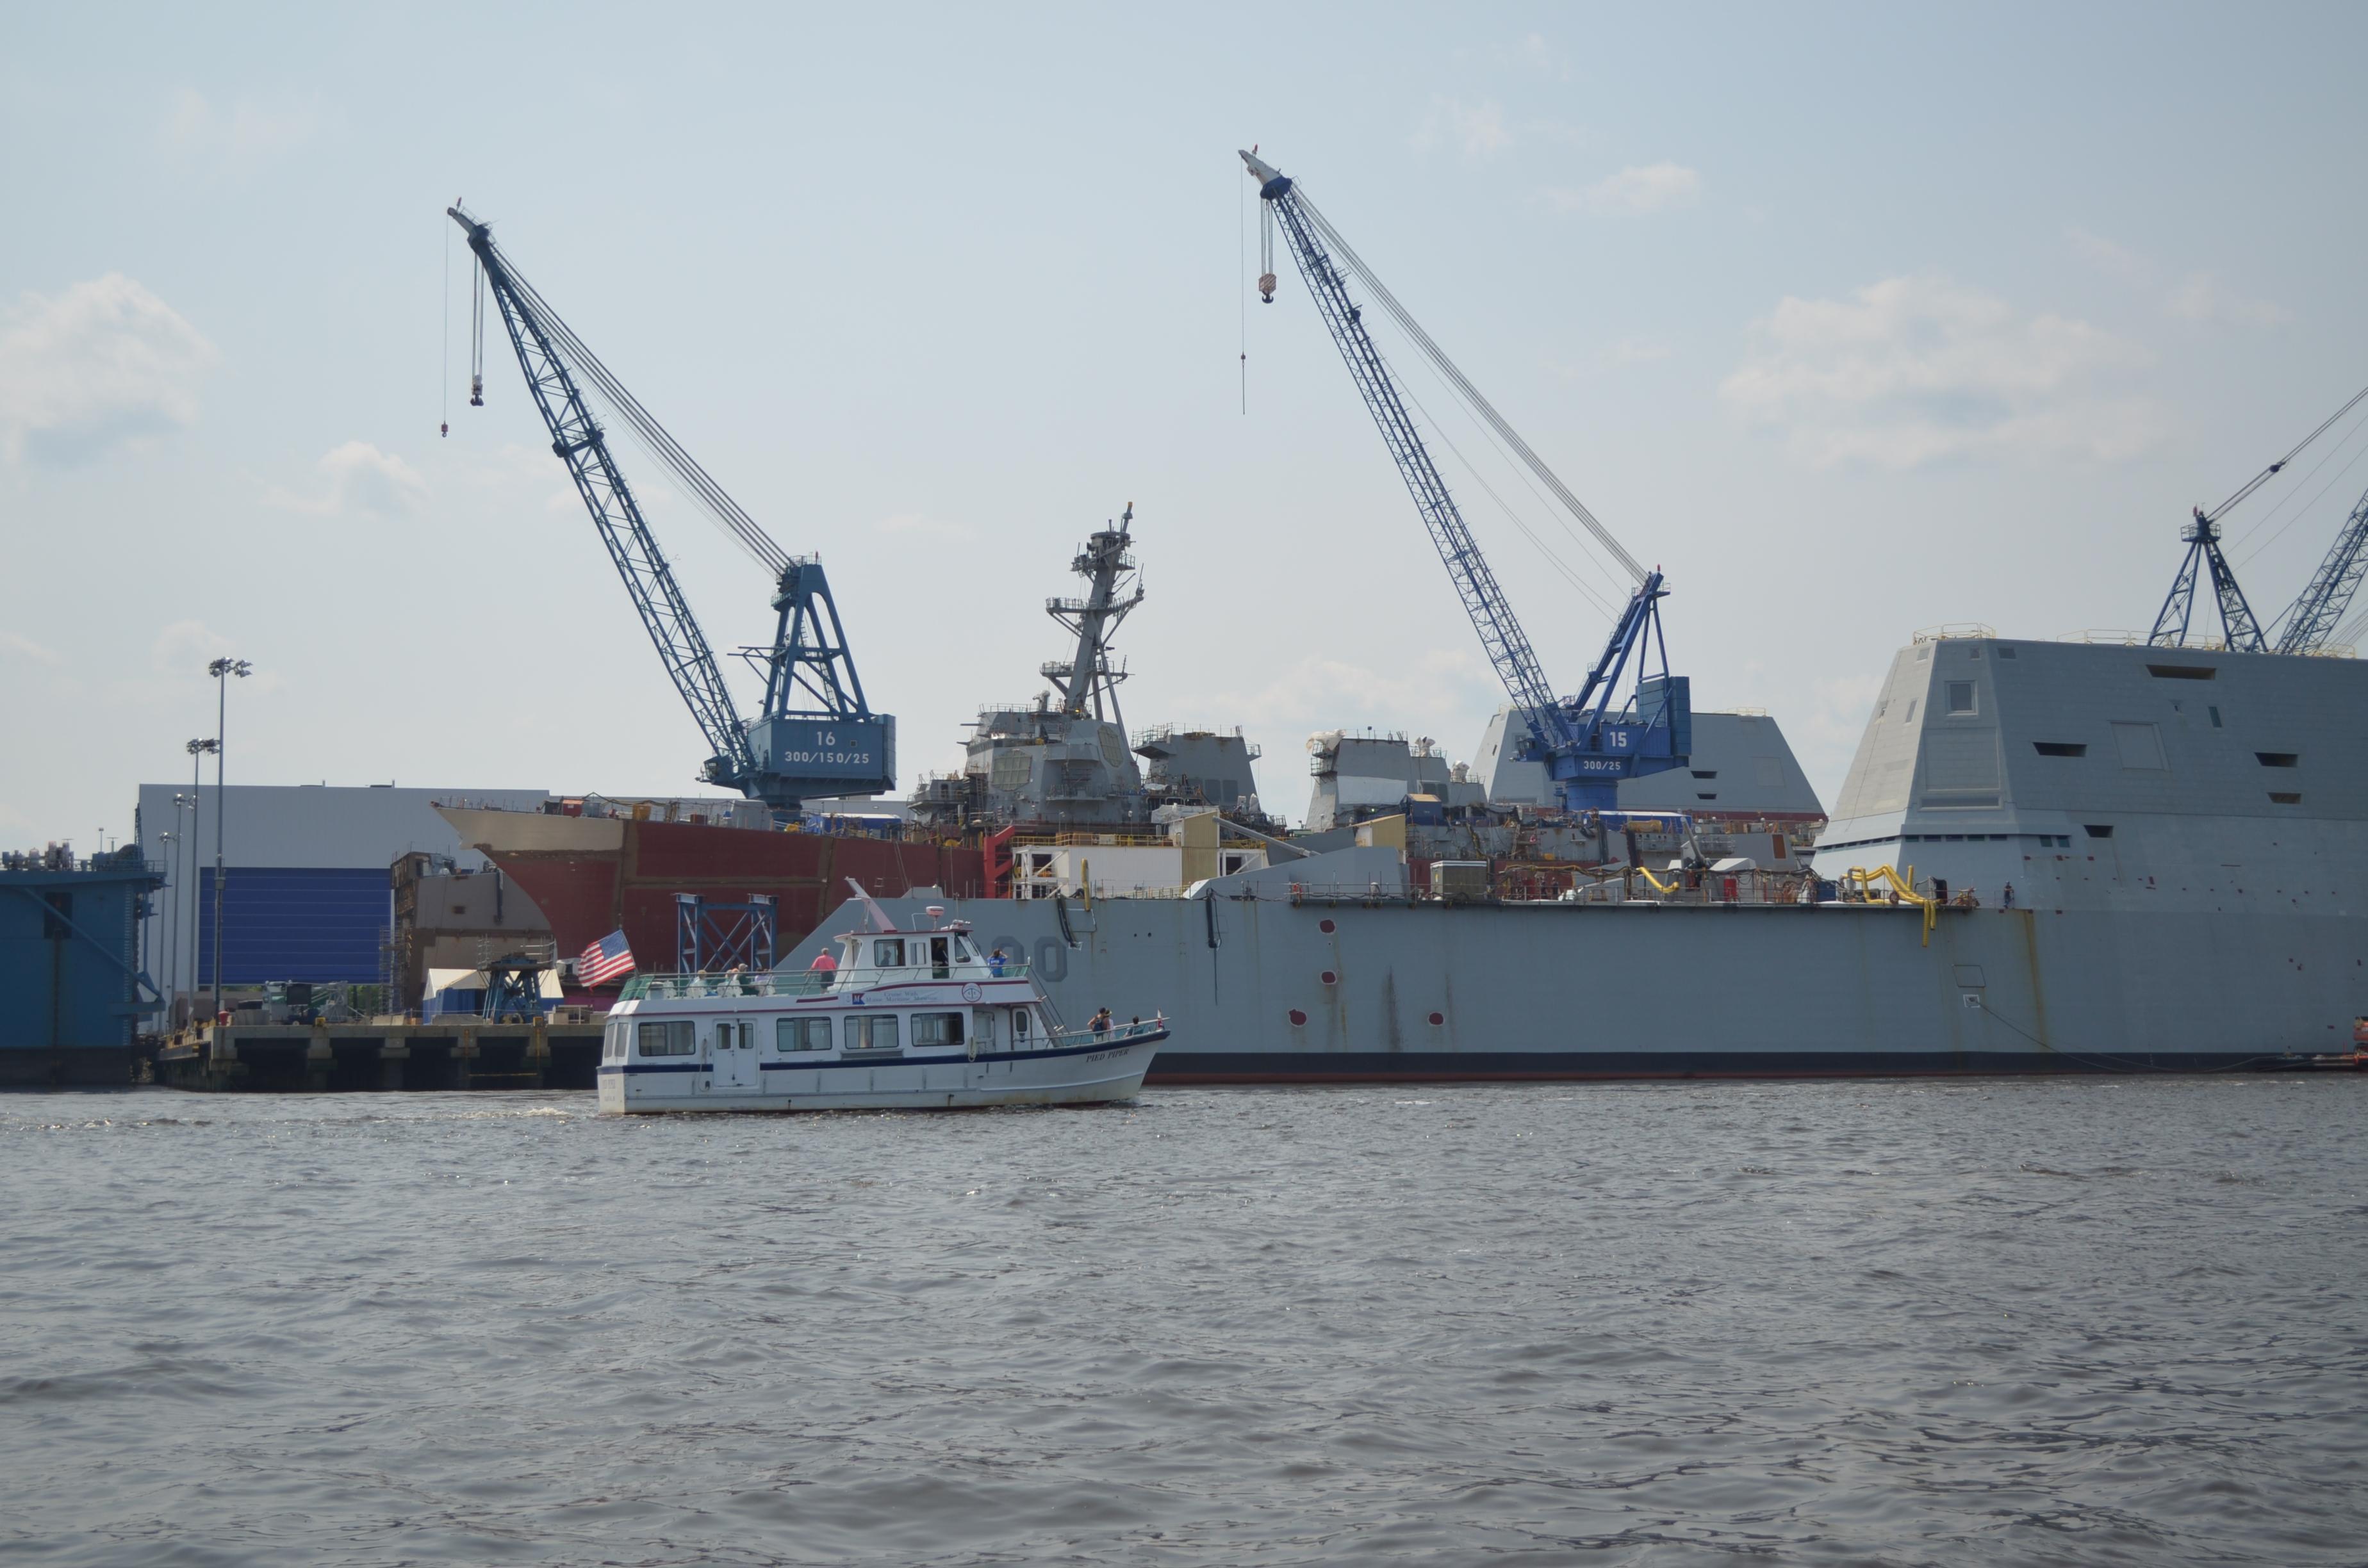 The Bath Iron Works Story: By Land & Sea